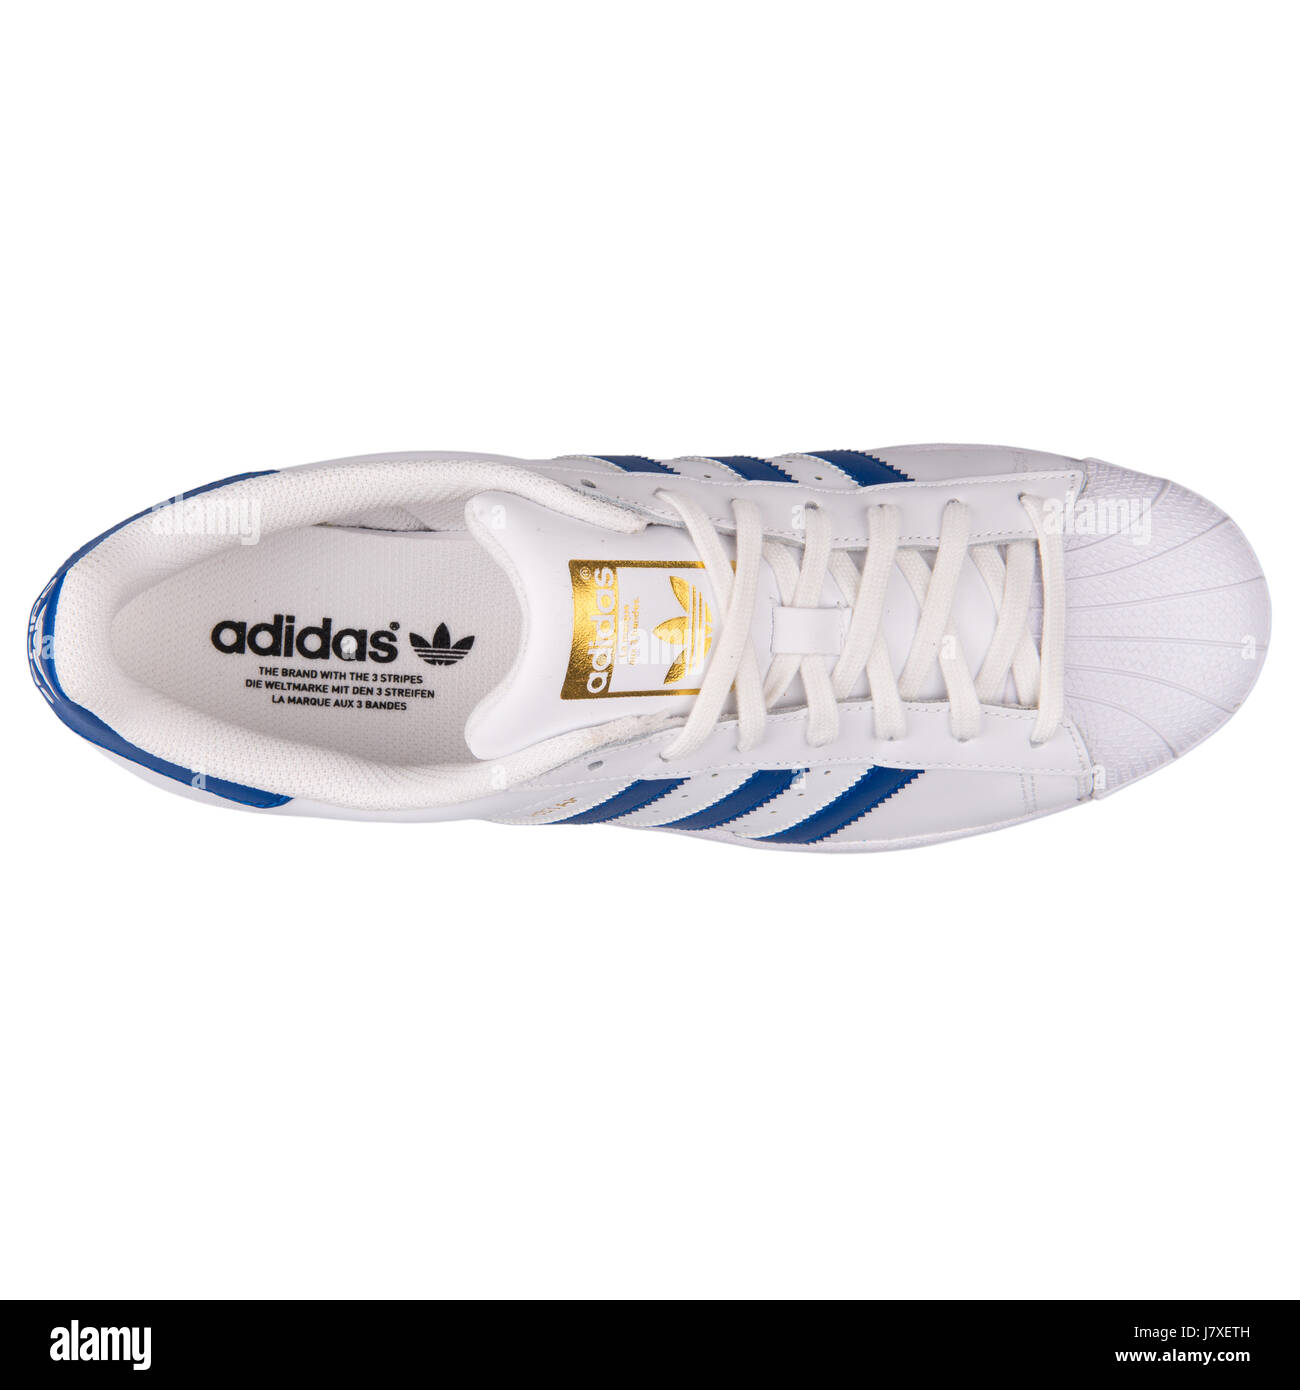 Adidas Superstar Foundation Men's Leather White with Blue Sneakers - B27141  Photo Stock - Alamy